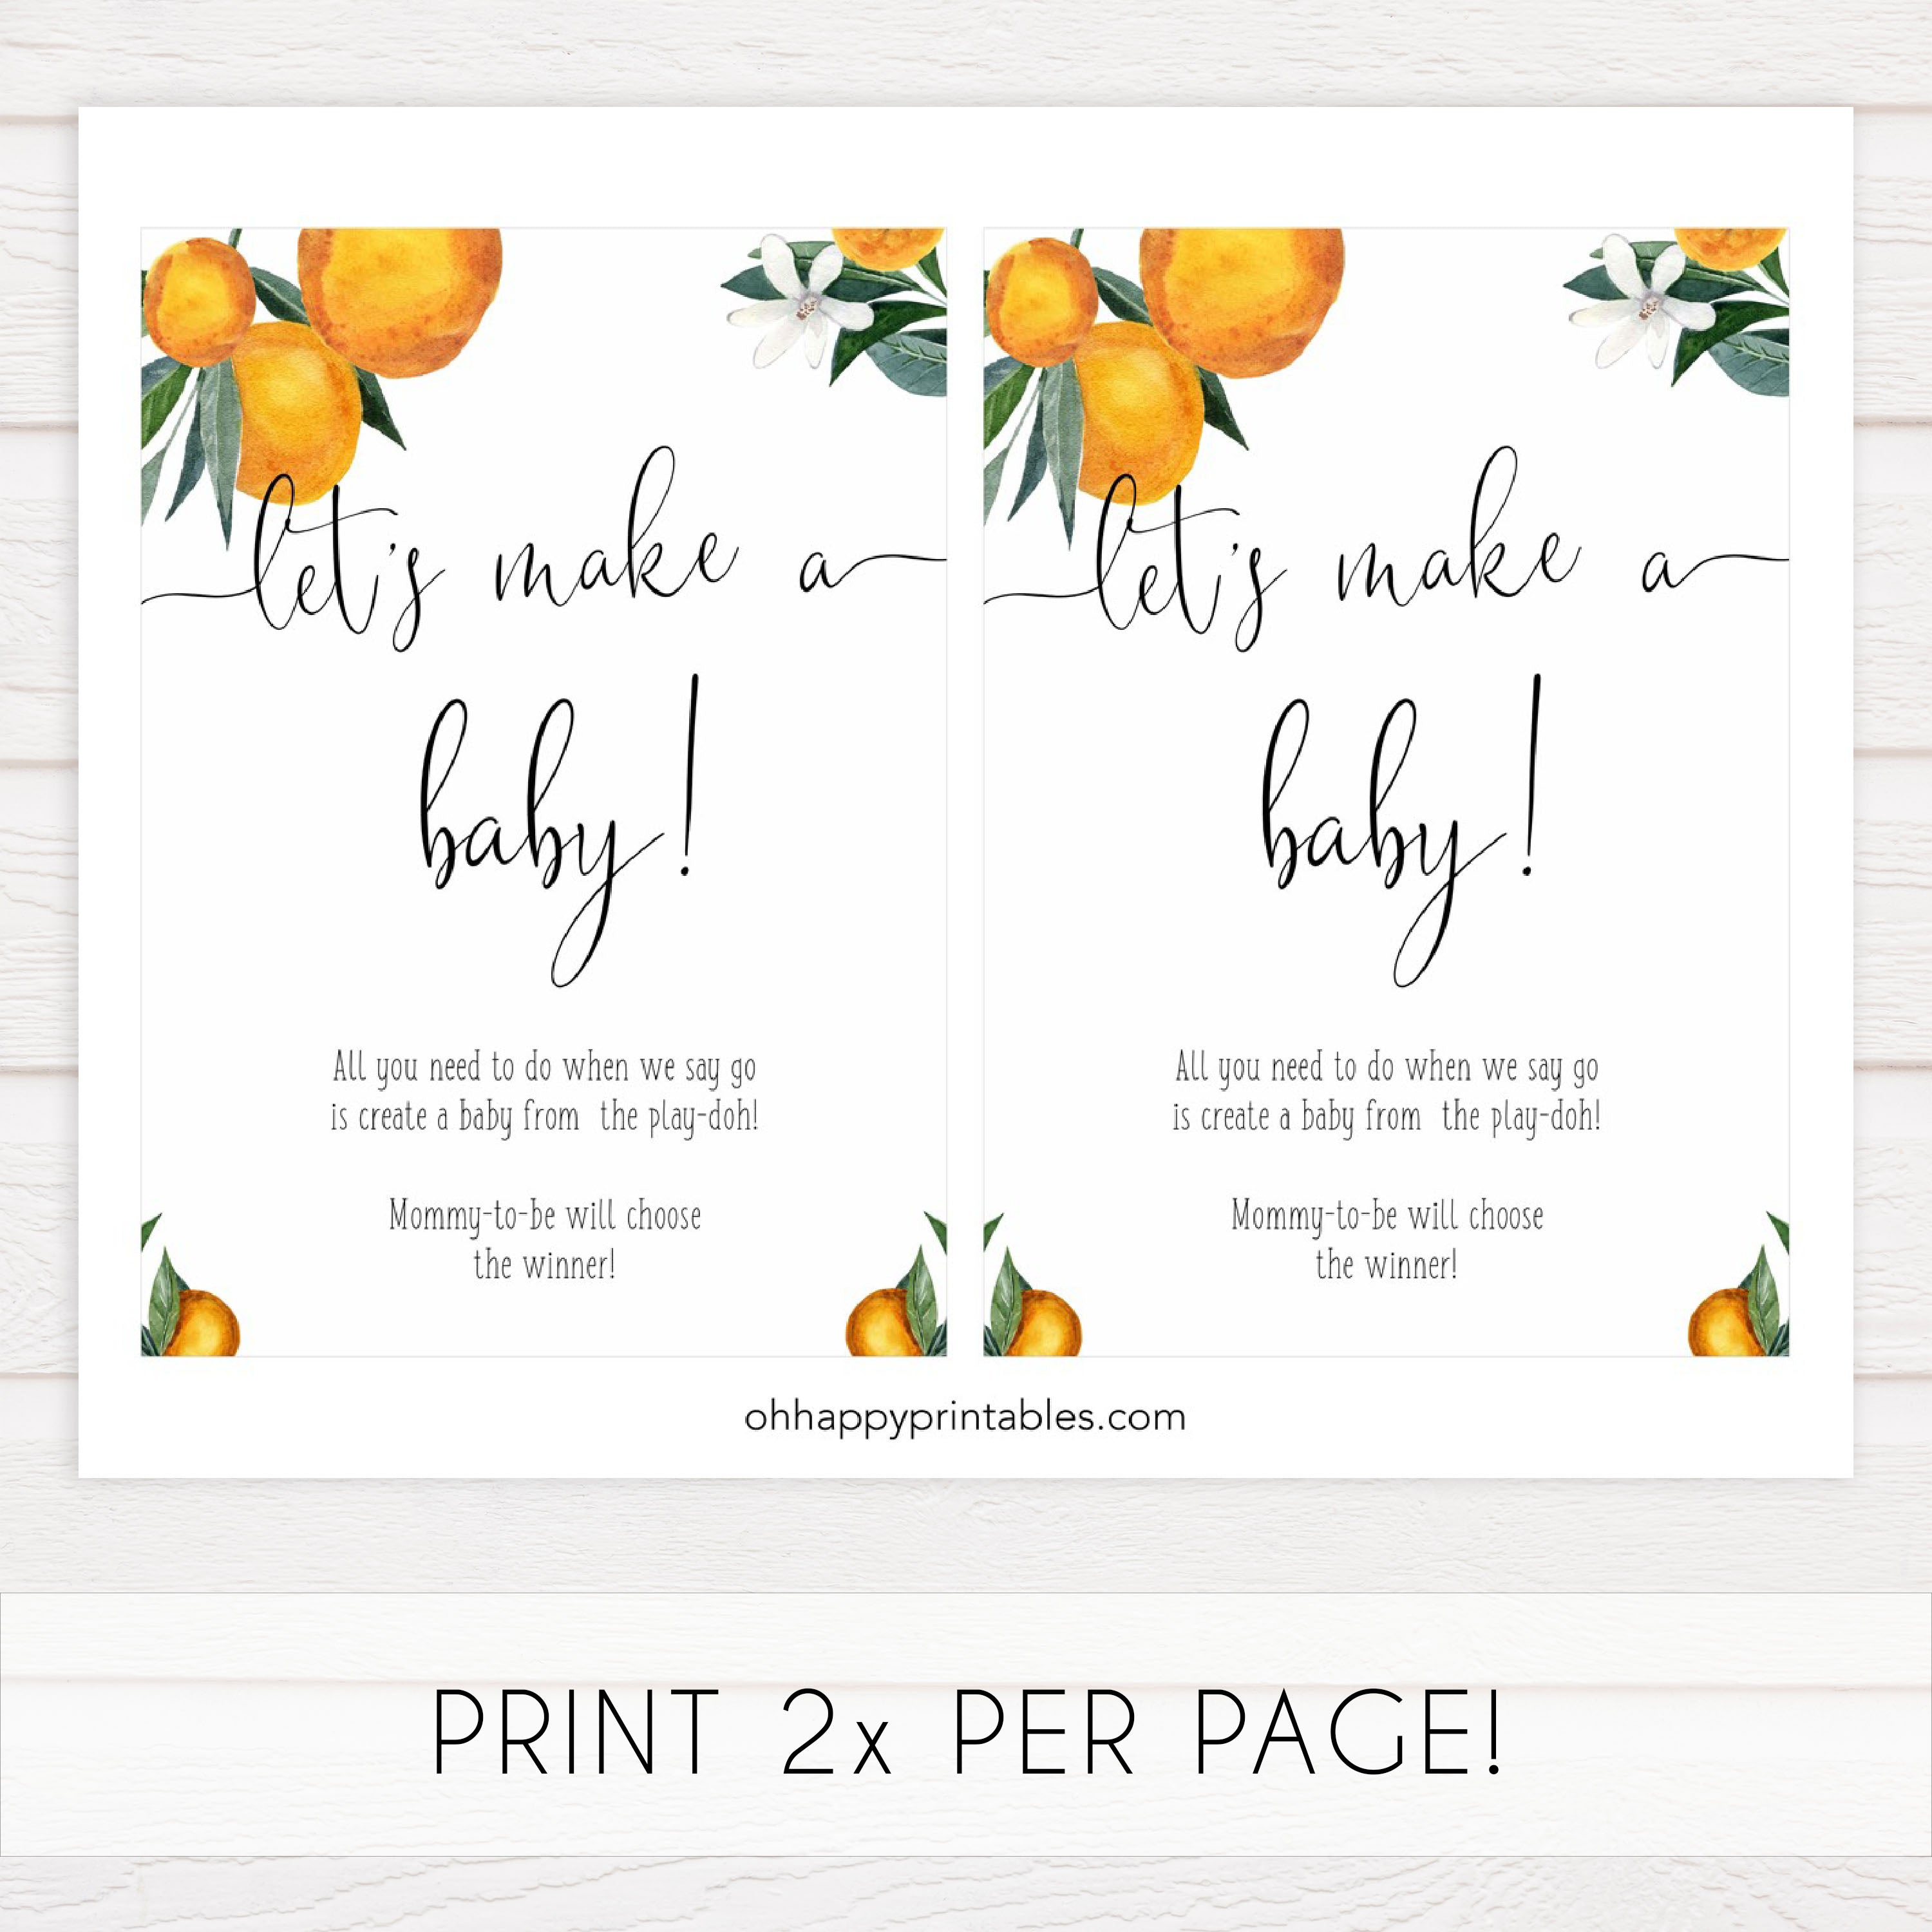 lets make a baby game, Printable baby shower games, little cutie baby games, baby shower games, fun baby shower ideas, top baby shower ideas, little cutie baby shower, baby shower games, fun little cutie baby shower ideas, citrus baby shower games, citrus baby shower, orange baby shower